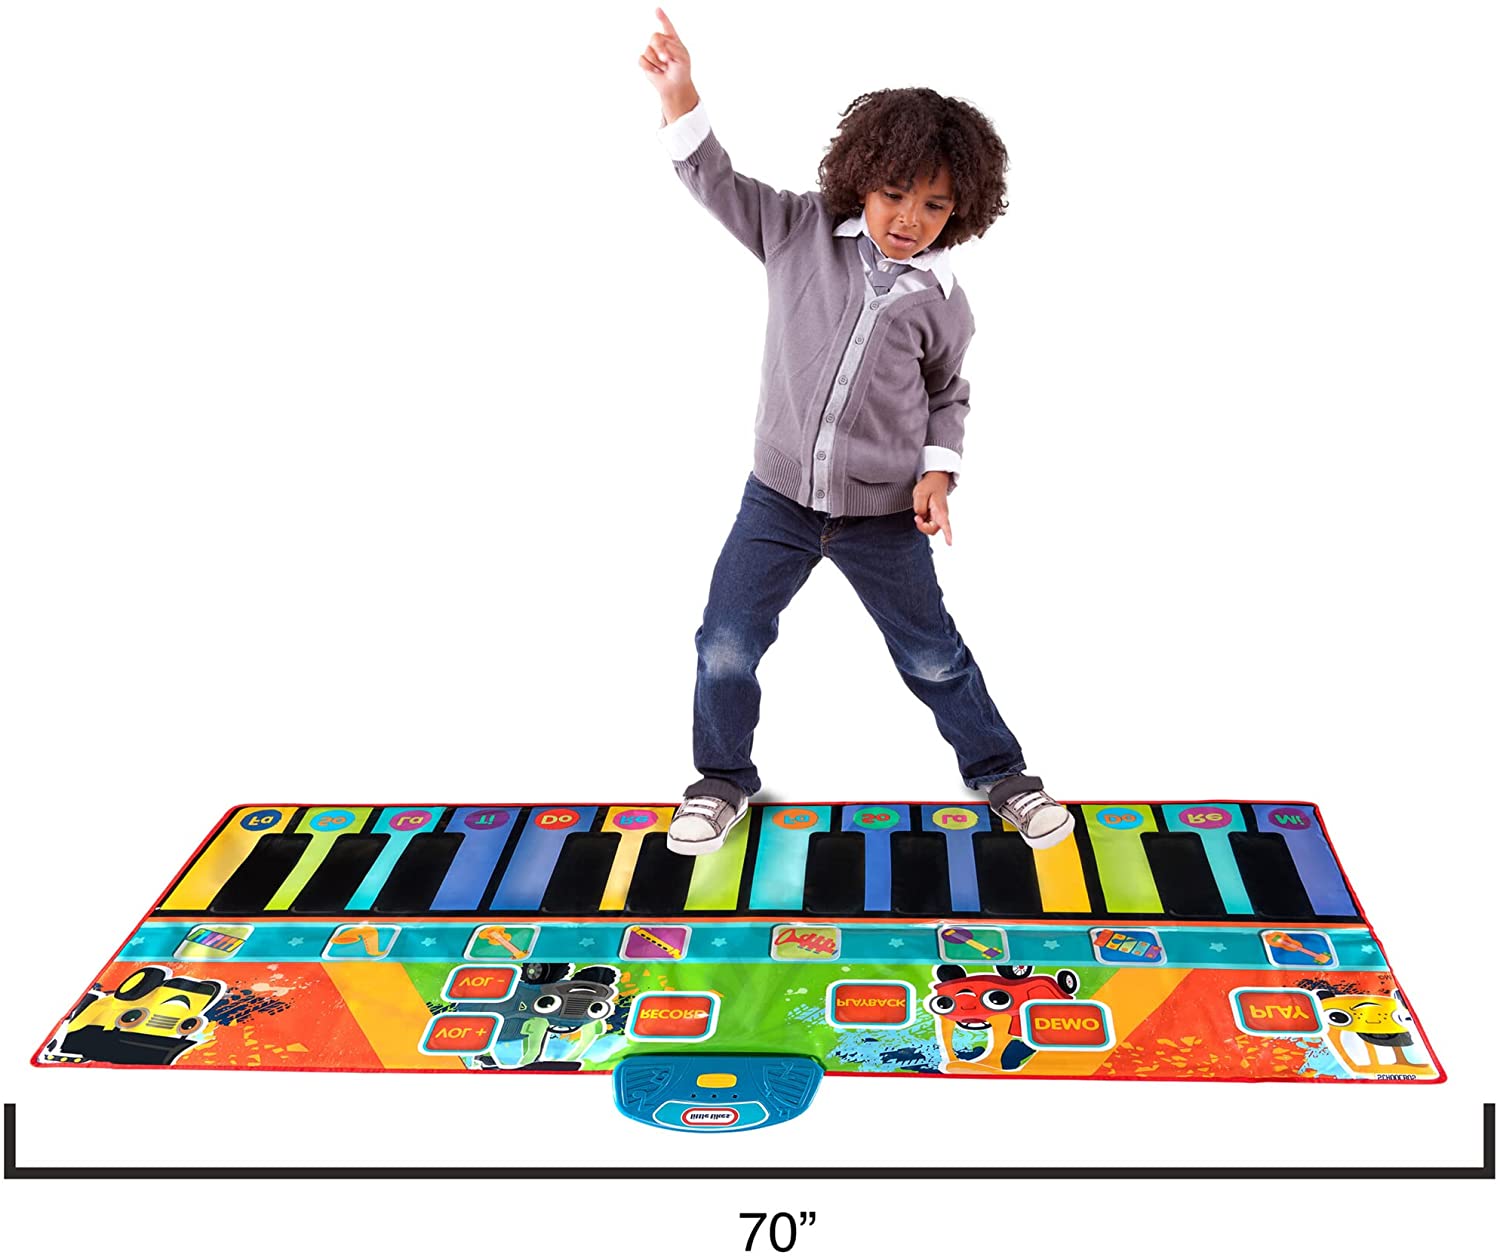 70" First Act Little Tikes Giant Musical Piano Mat w/ 24 Keys & Record/Playback $12.10 + FS w/ Prime or Orders $25+